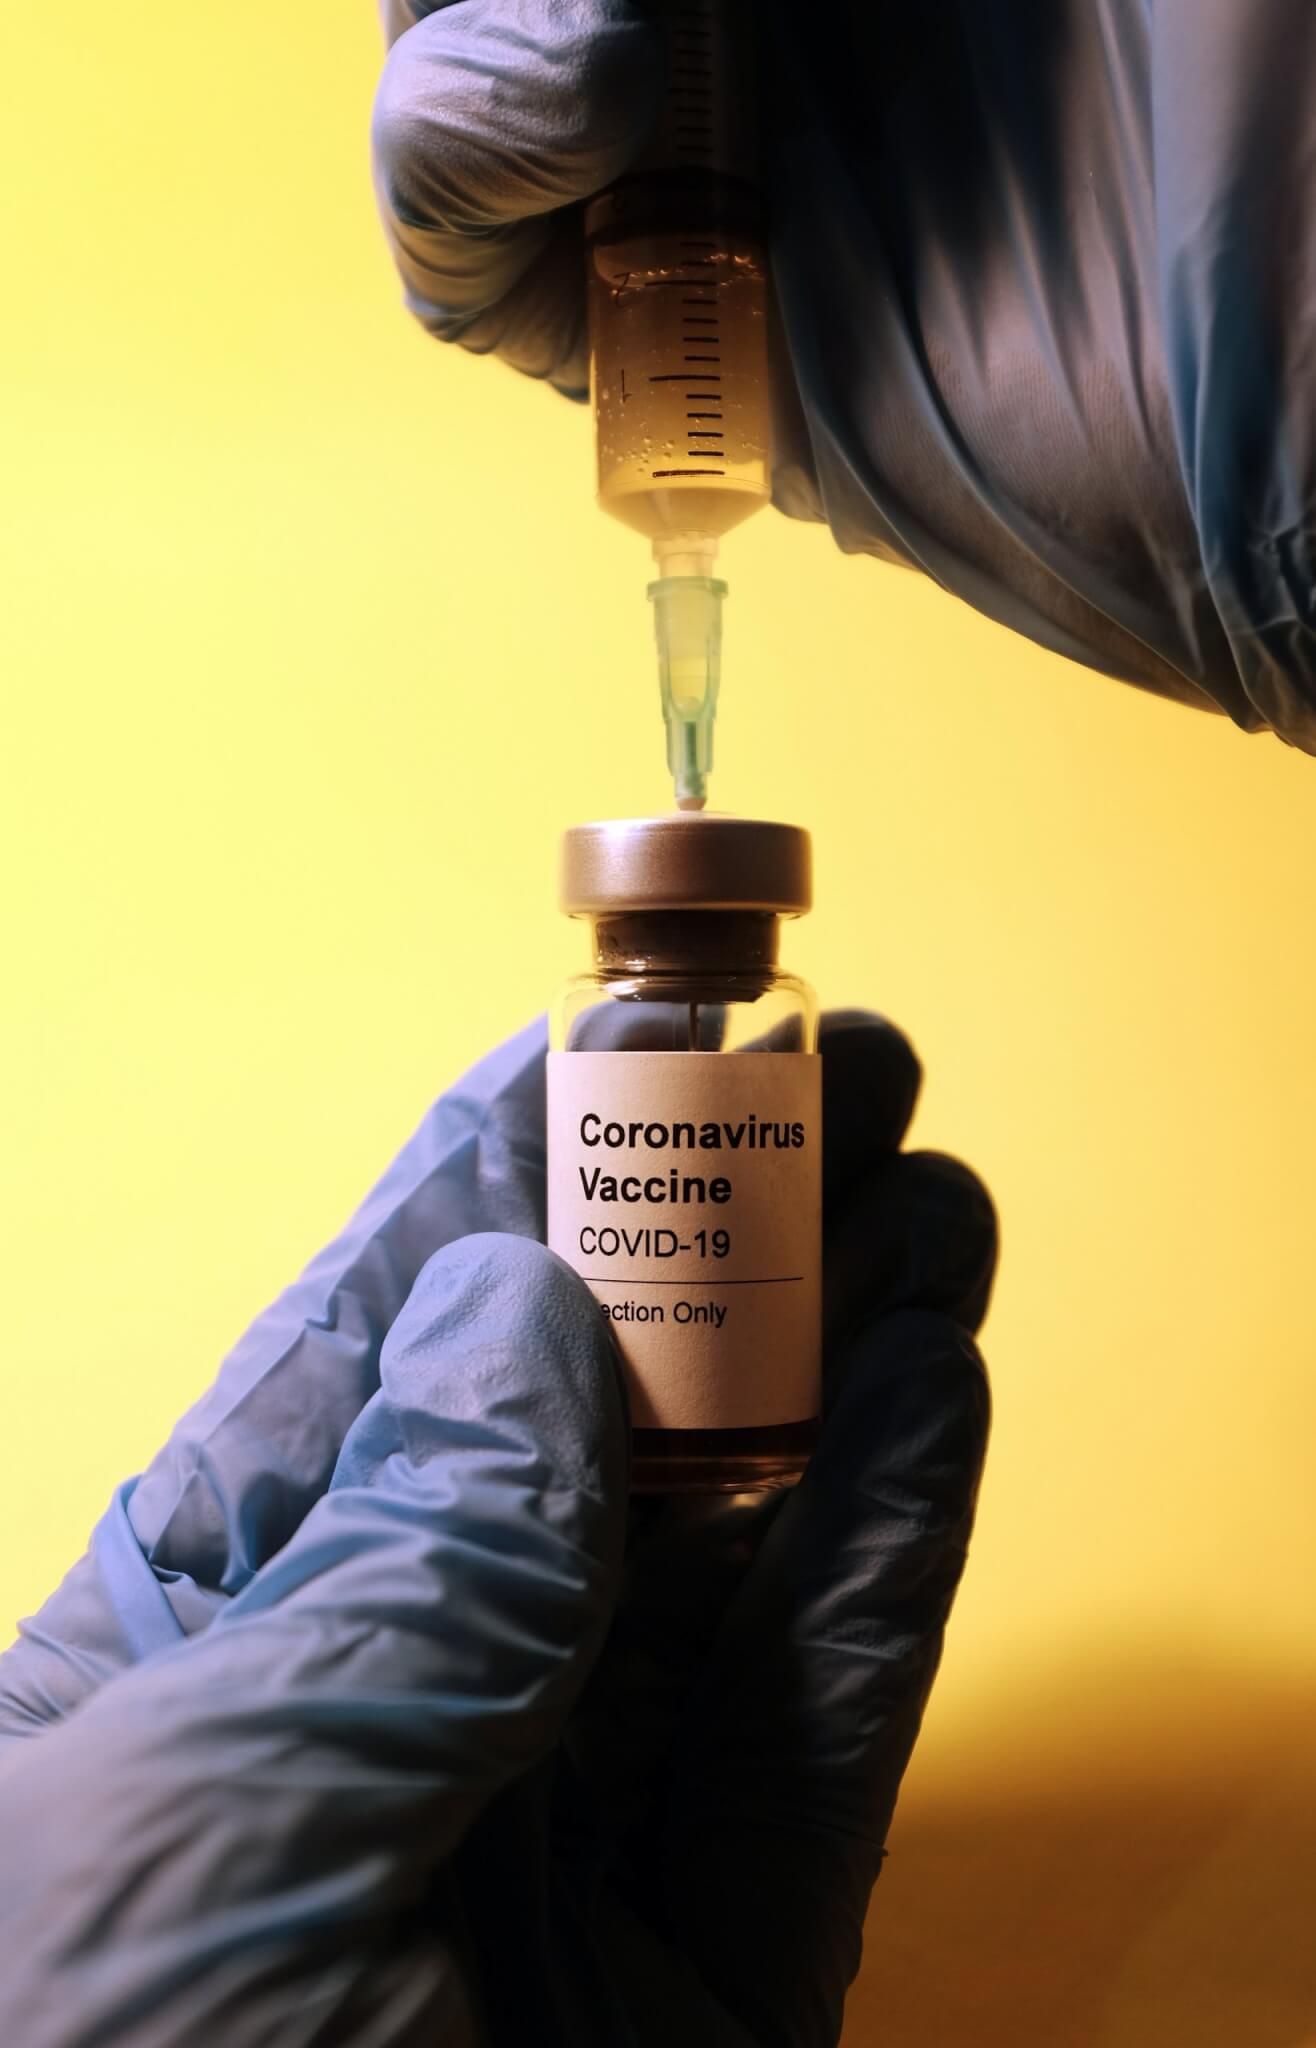 White People Are Getting Vaccinated at Higher Rates Than Black and Latino Americans